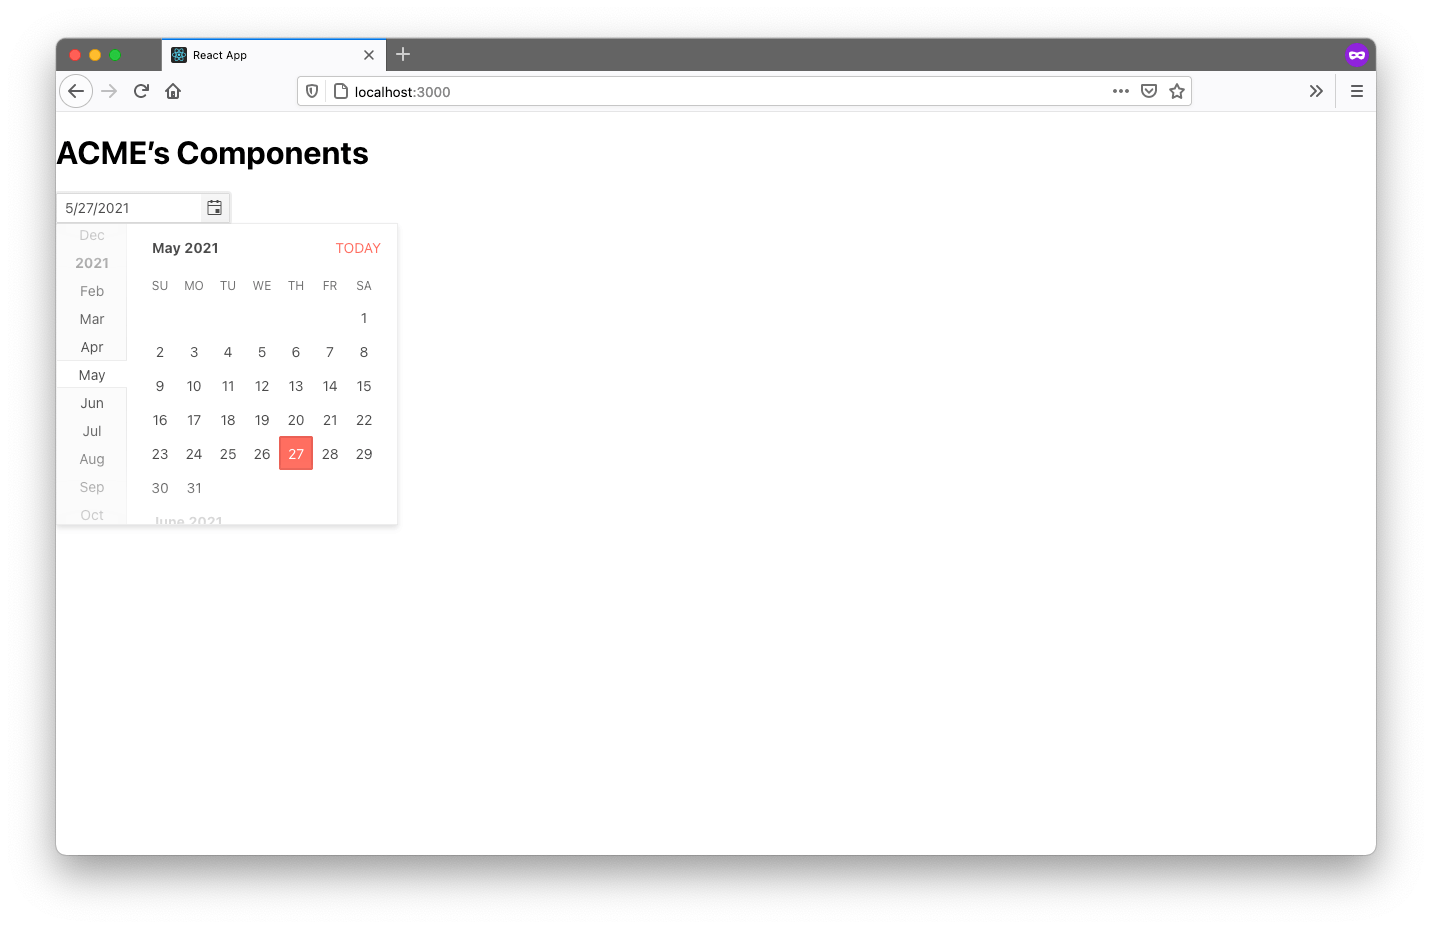 A correctly styled datepicker - a nice calendar shows up